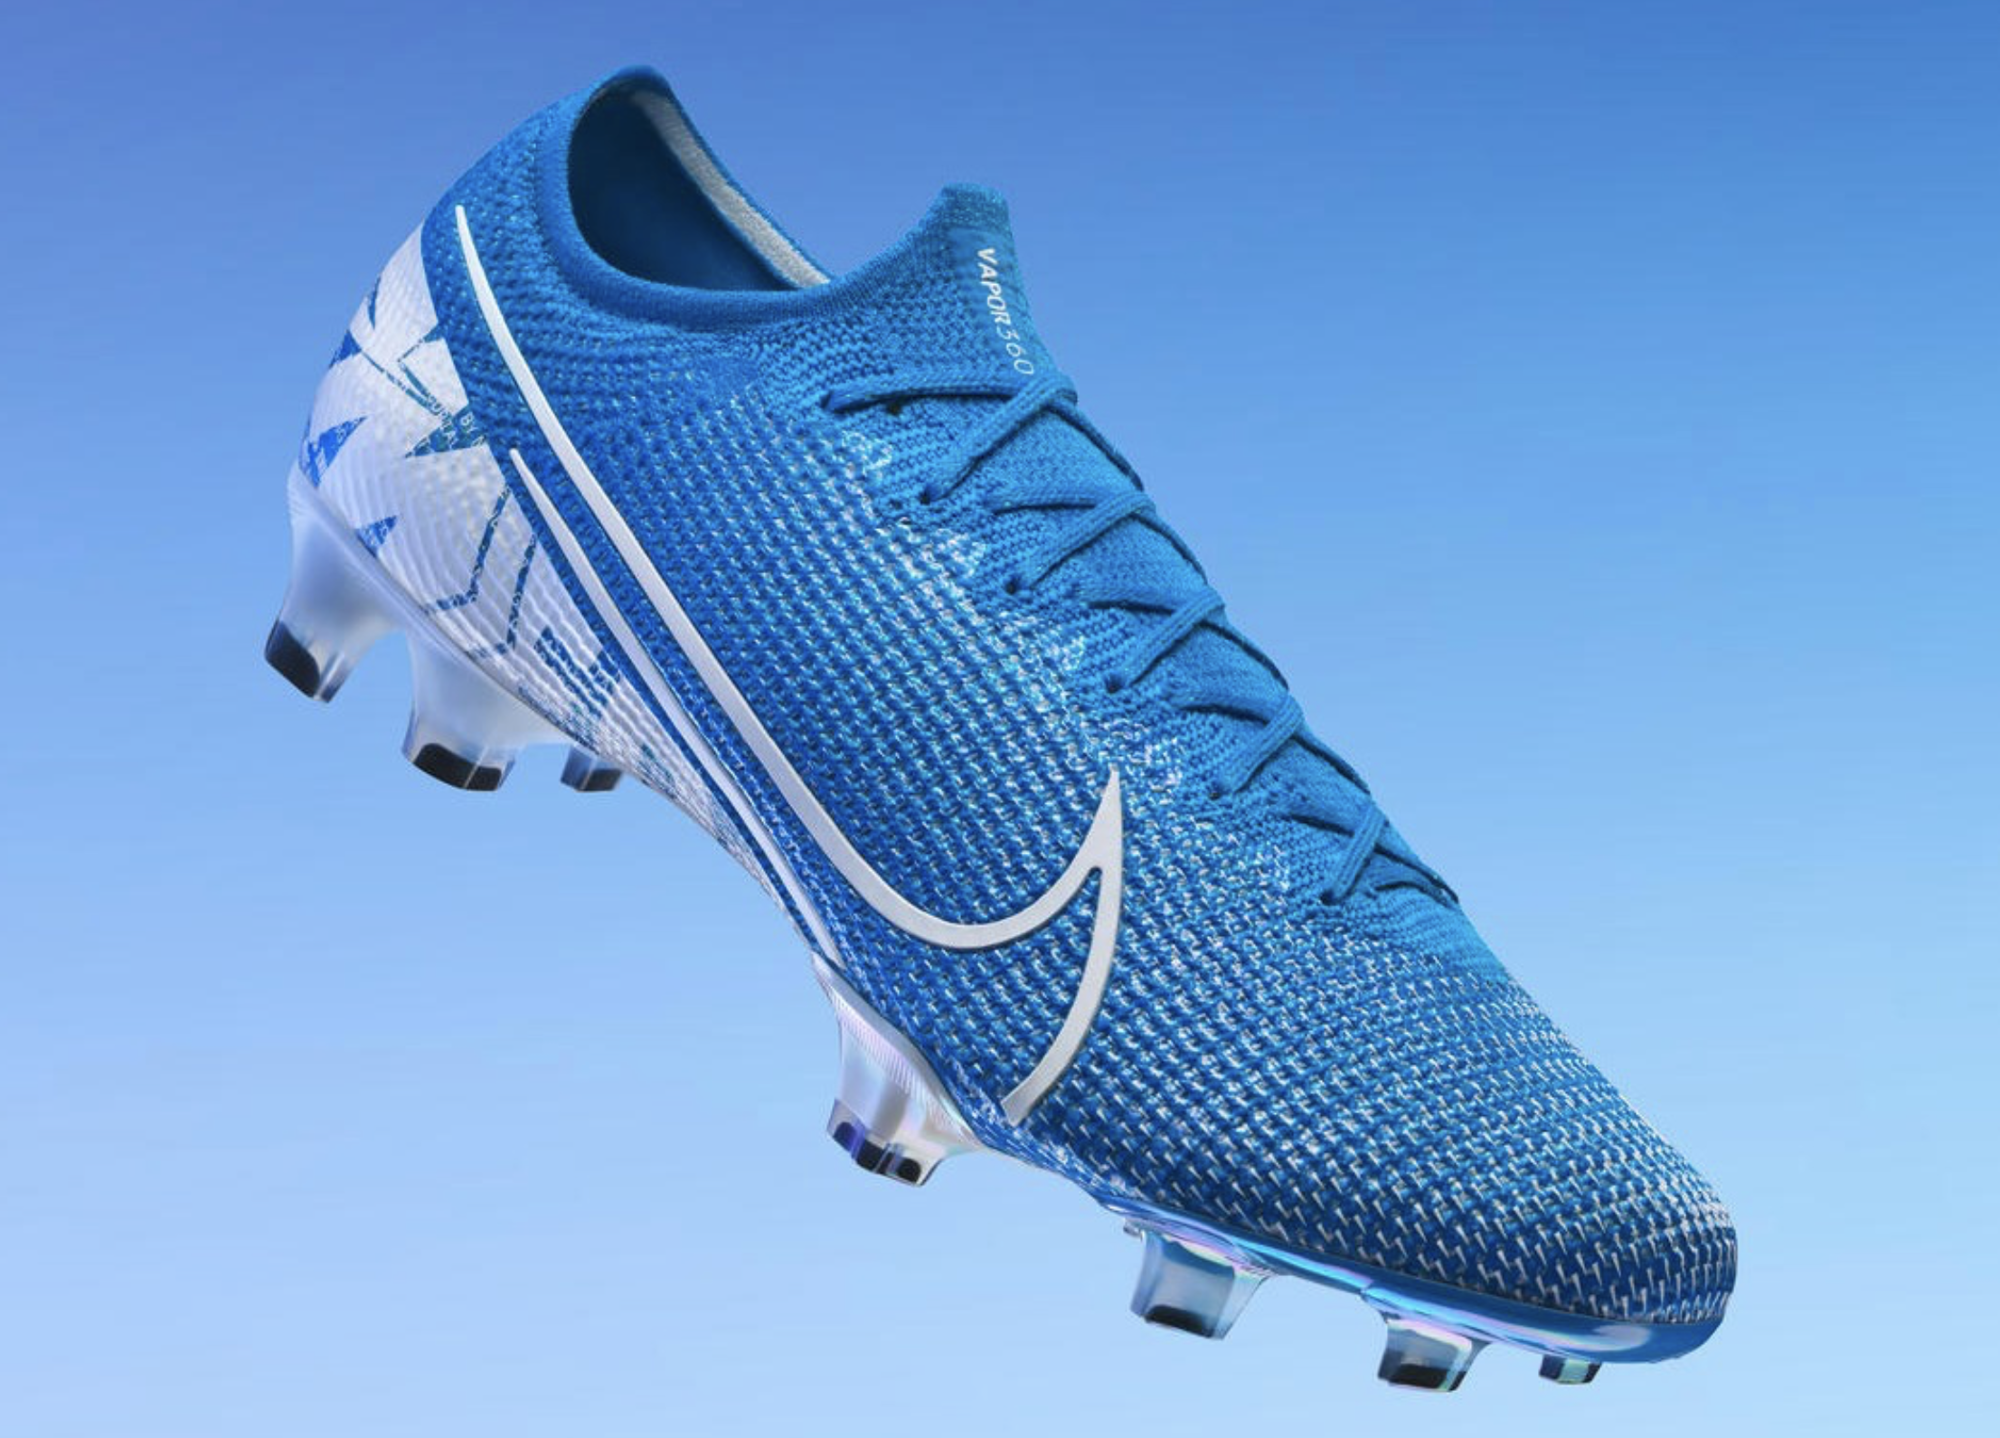 Celebrating The Mercurial, Nike's Iconic Boot Which 21 Years Old This Year | Football | TheSportsman